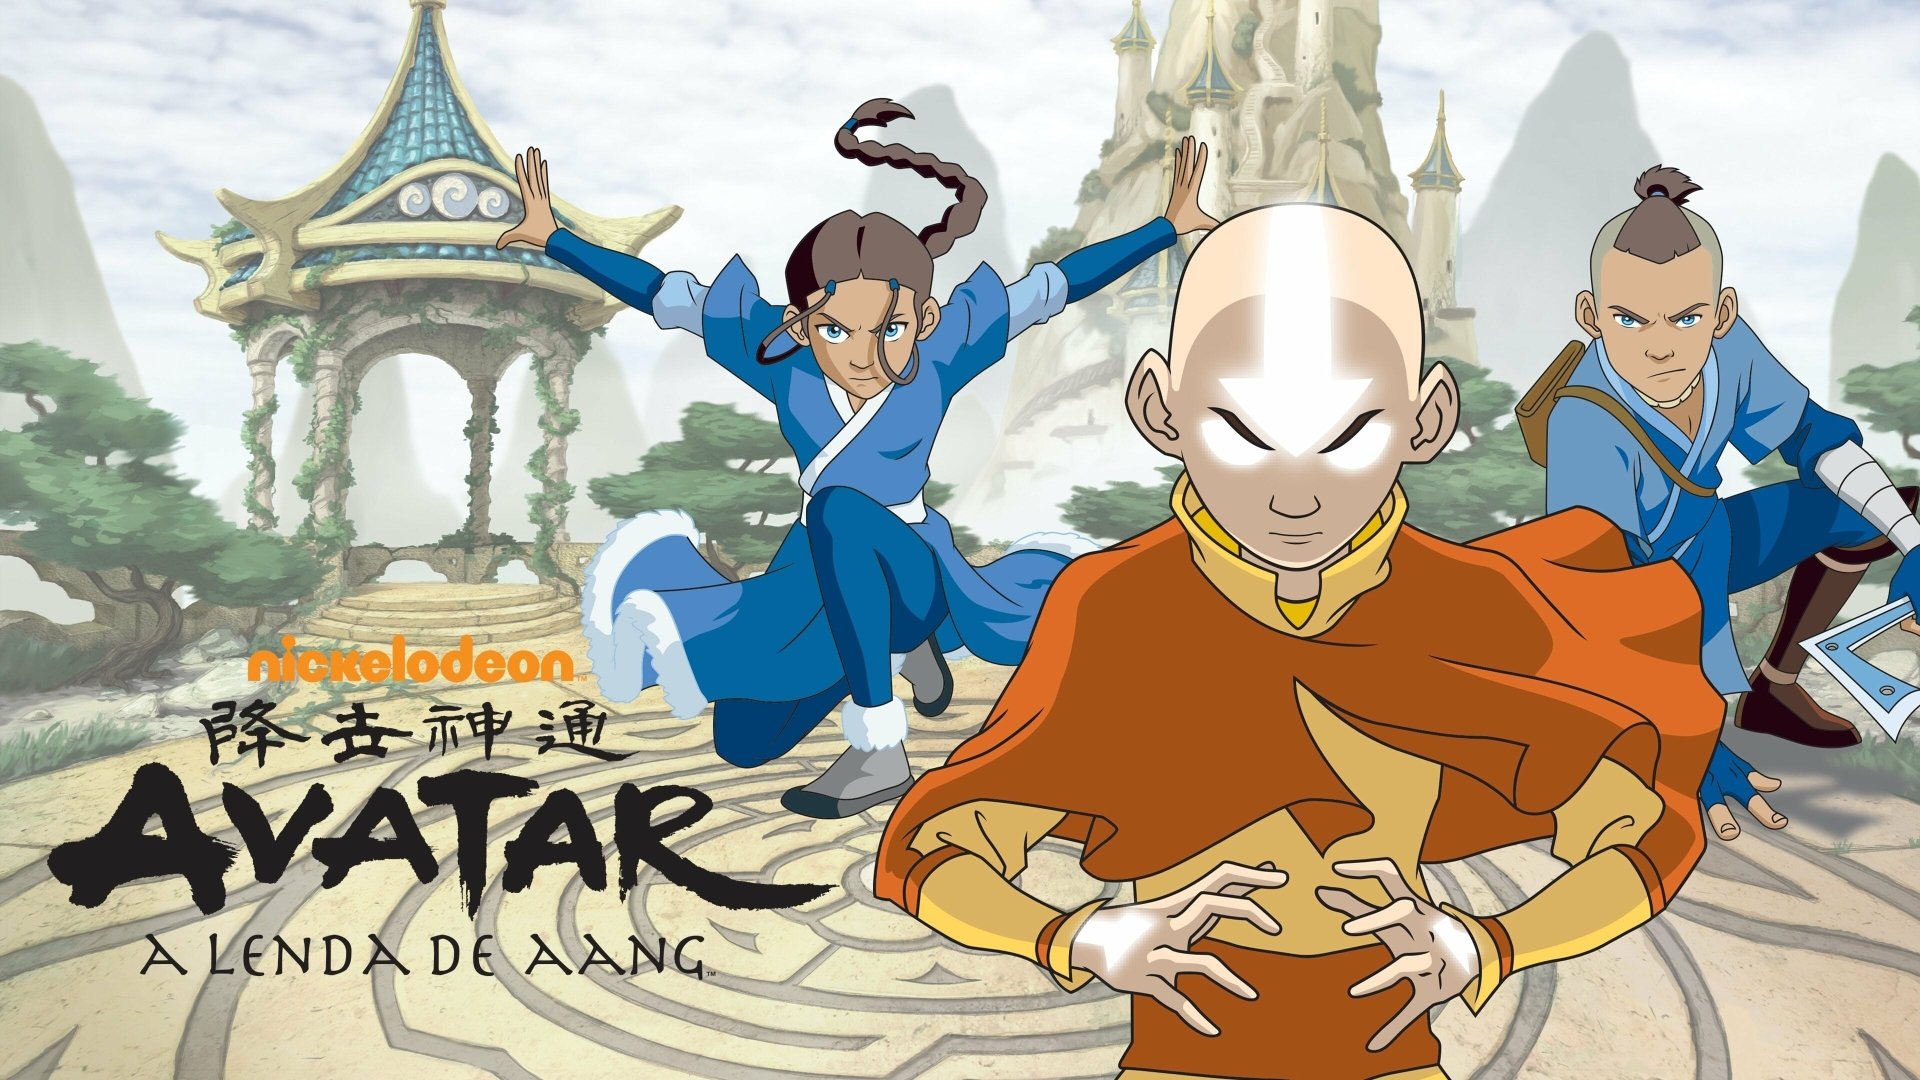 3840x2160 Avatar: The Last Airbender Wallpaper Background Image. 